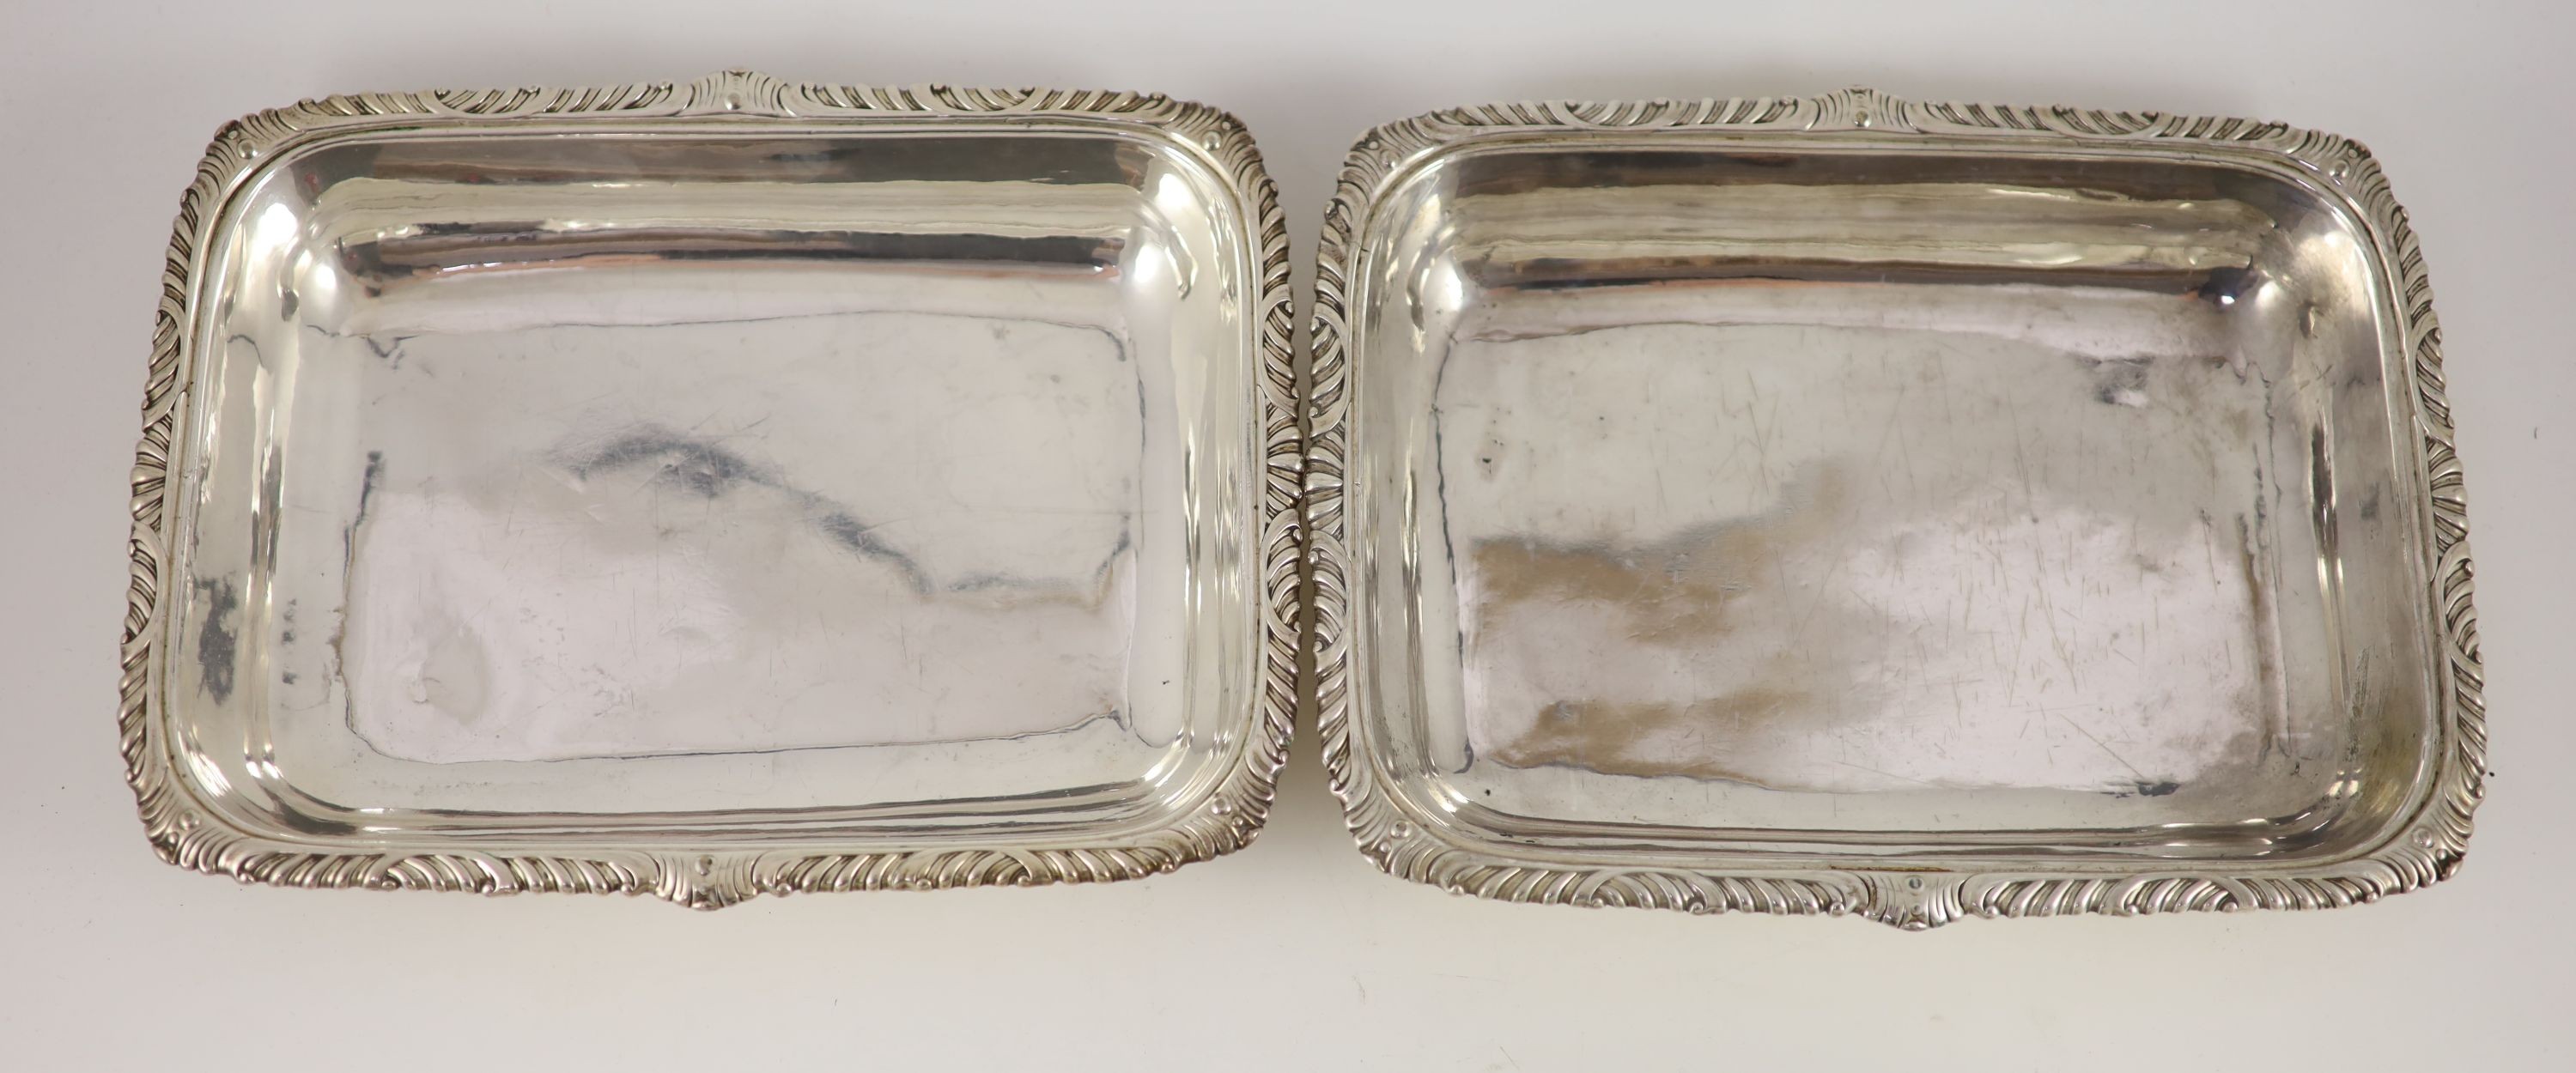 A pair of George III silver entrée dishes and covers, James Kirkby, Waterhouse & Co, Sheffield